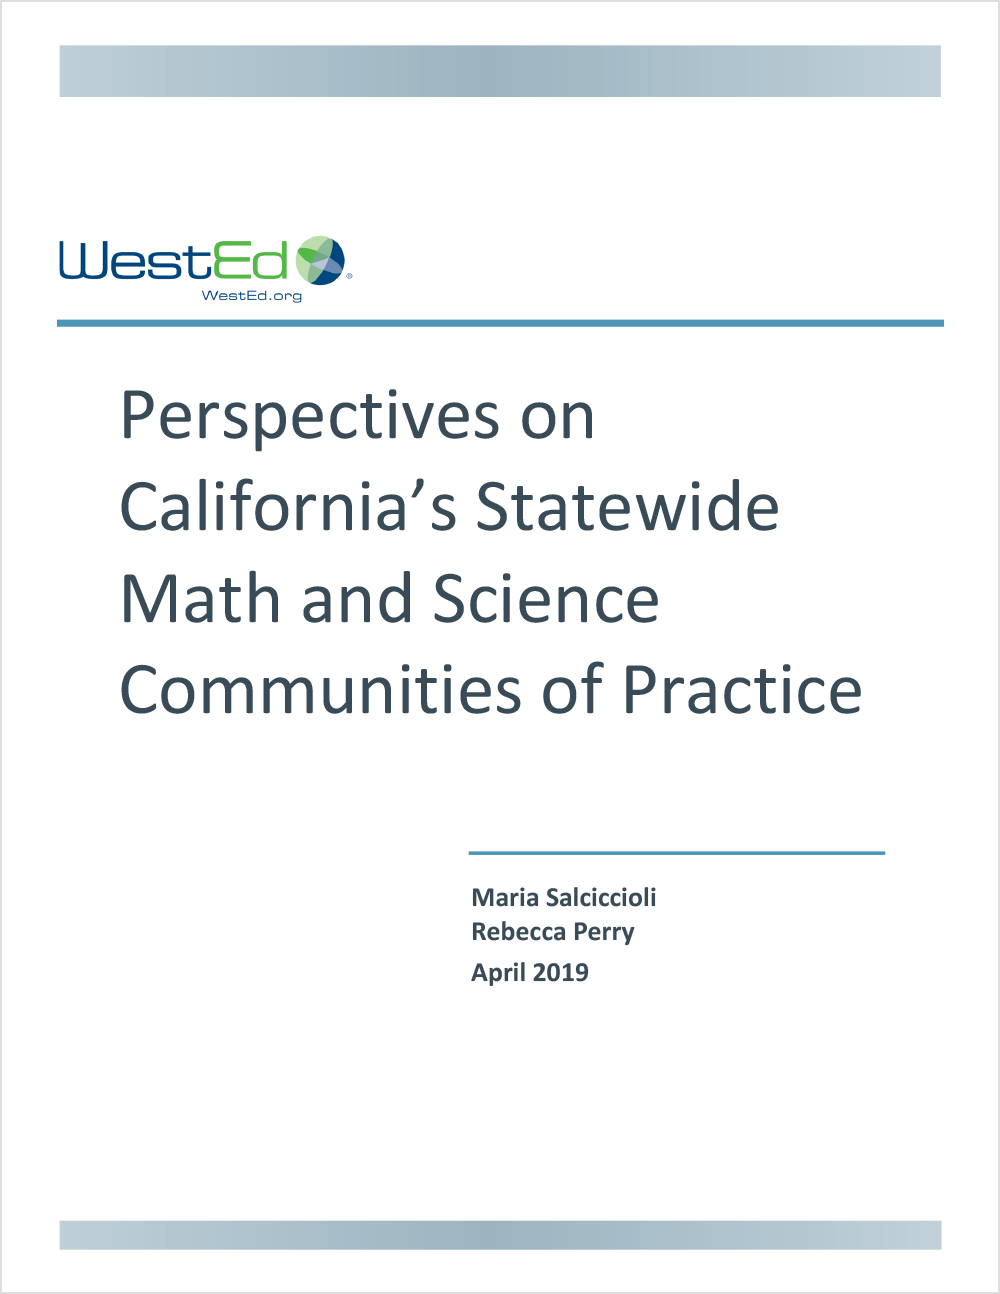 Perspectives on California's Statewide Math and Science Communities of Practice